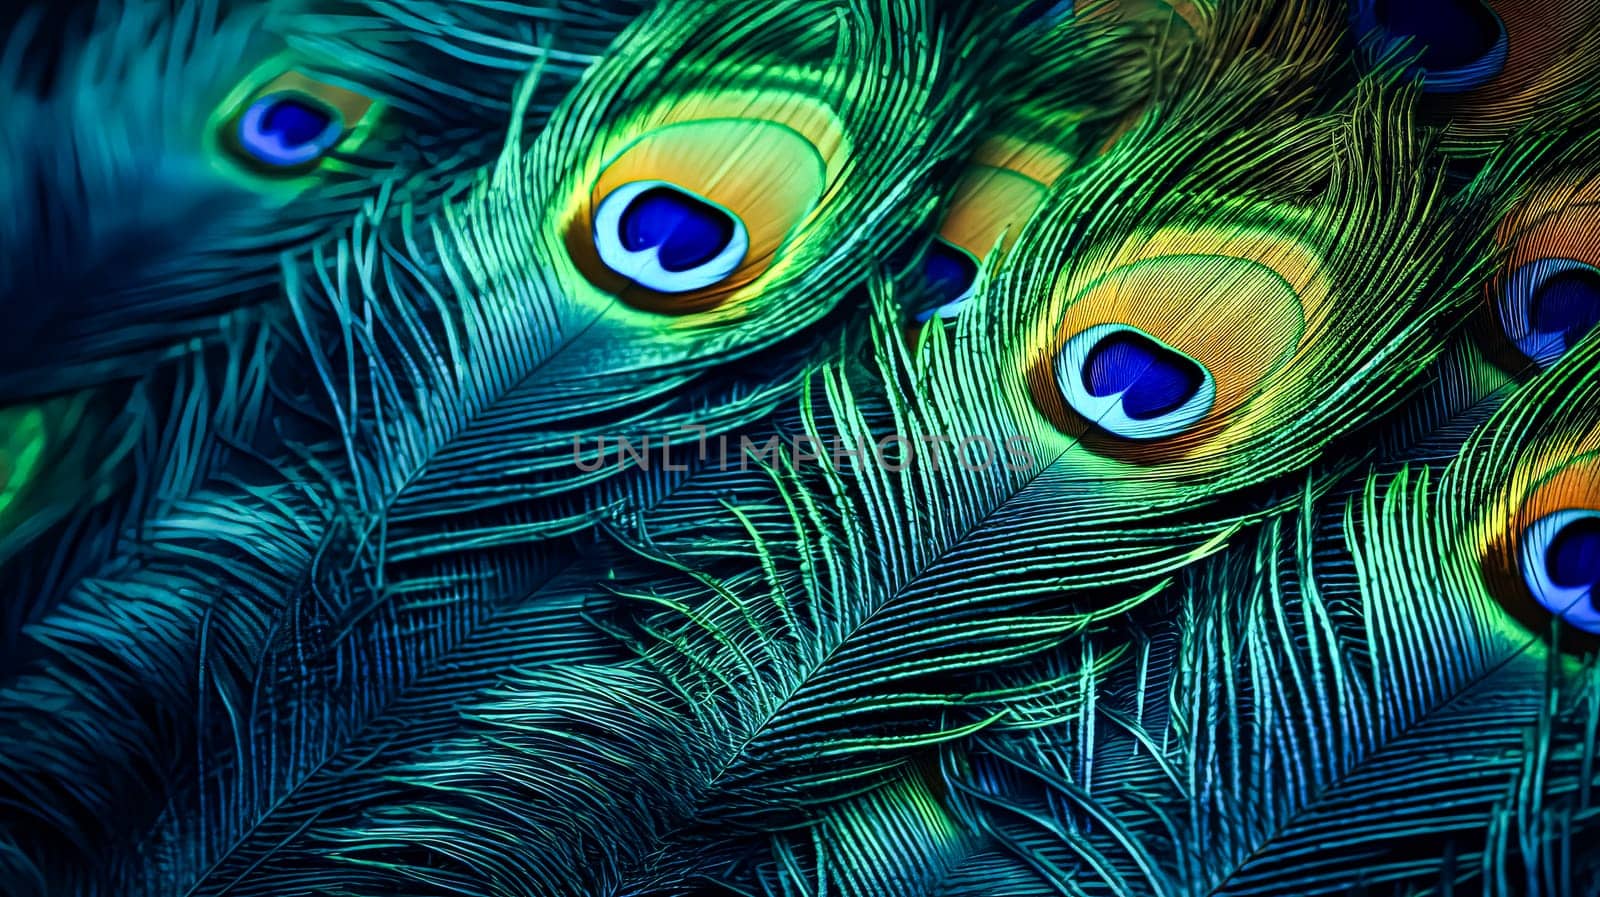 A close up of a group of peacock feathers, with their vibrant colors and intricate patterns. The feathers are arranged in a way that highlights their beauty and uniqueness, creating a sense of awe